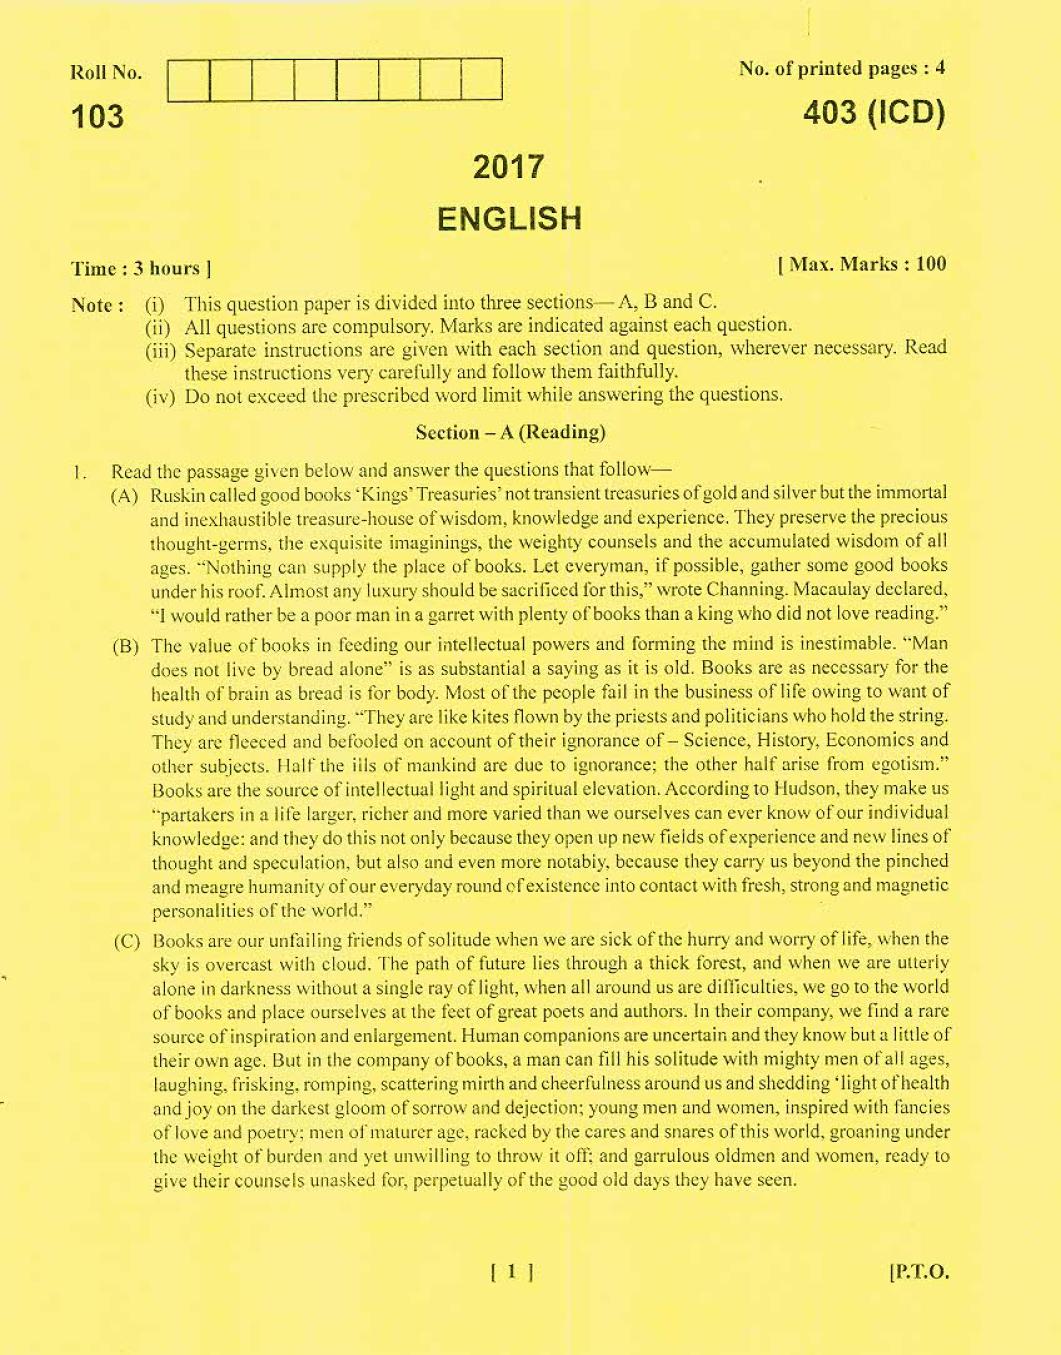 Uttarakhand Board Class 12 Question Paper 2017 for English - Page 1